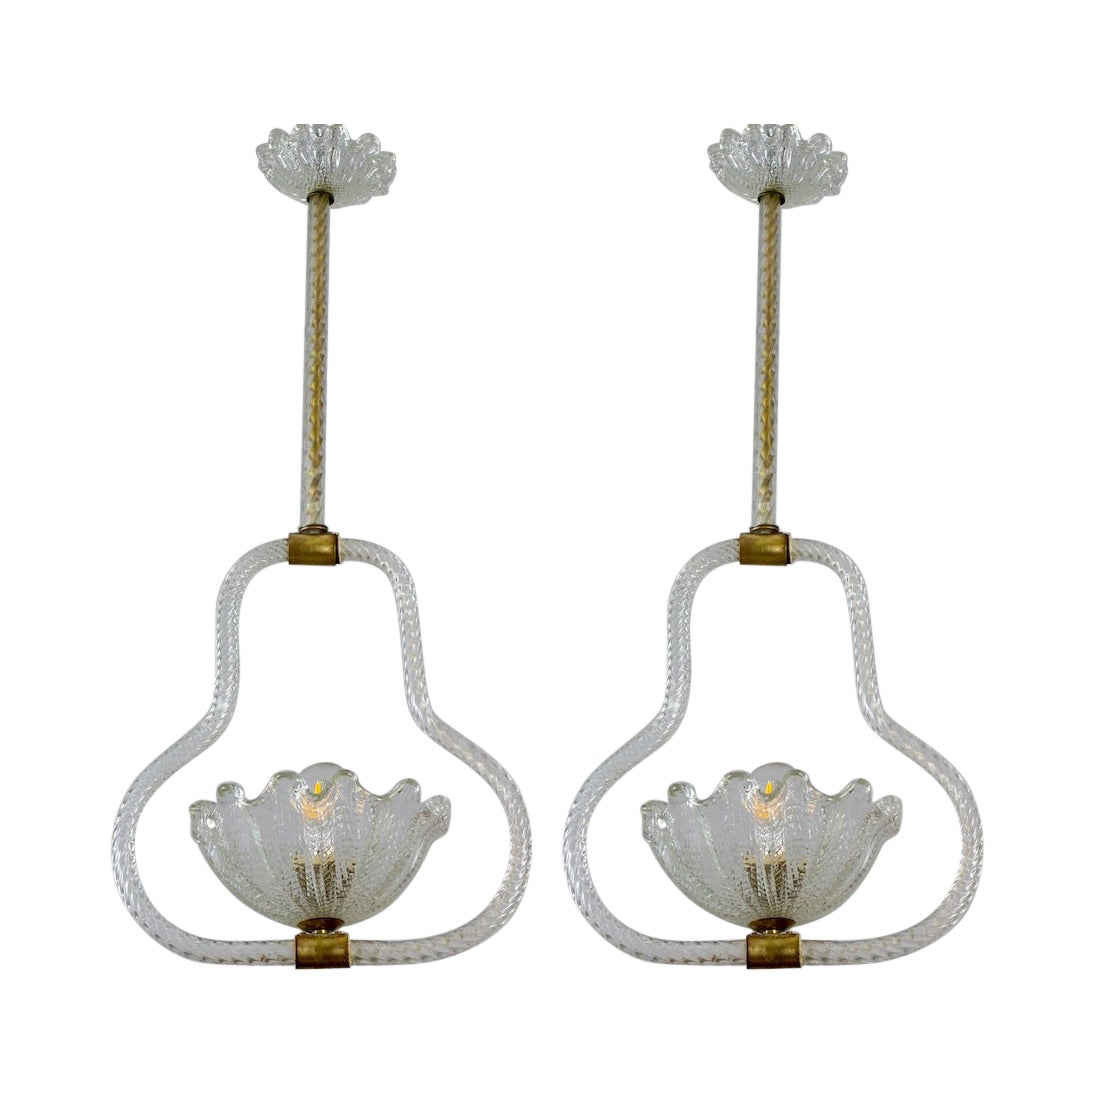 Pair of Art Deco Murano Glass and Brass Pendants or Lanterns by Barovier